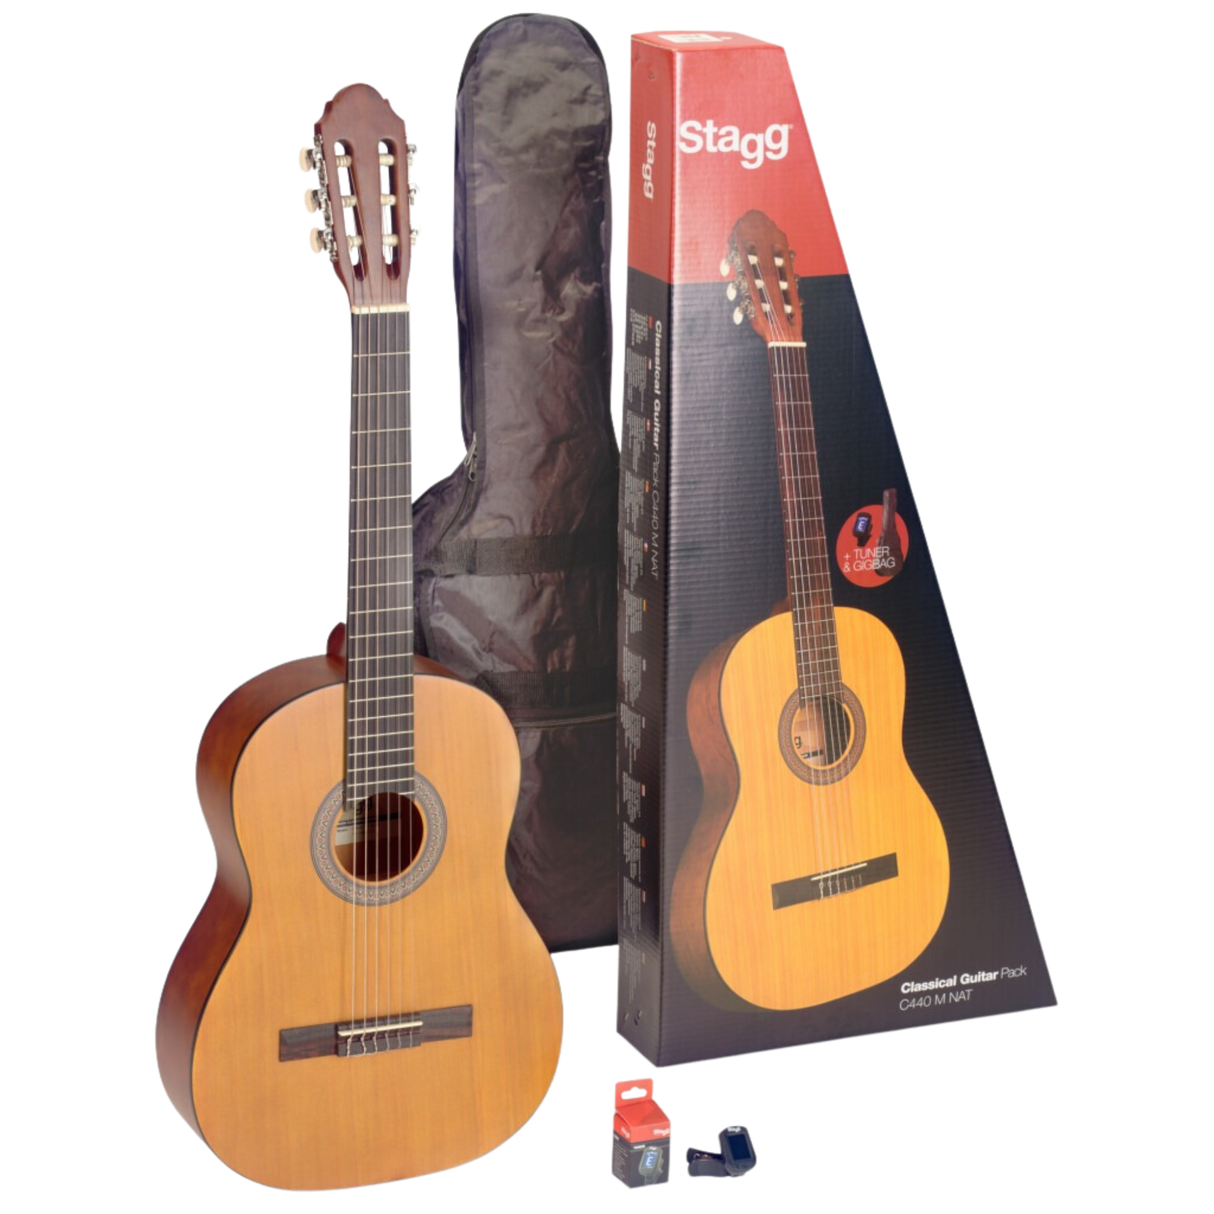 STAGG 4/4 Natural-coloured Classical Acoustic Guitar Pack - Hybrid Neck